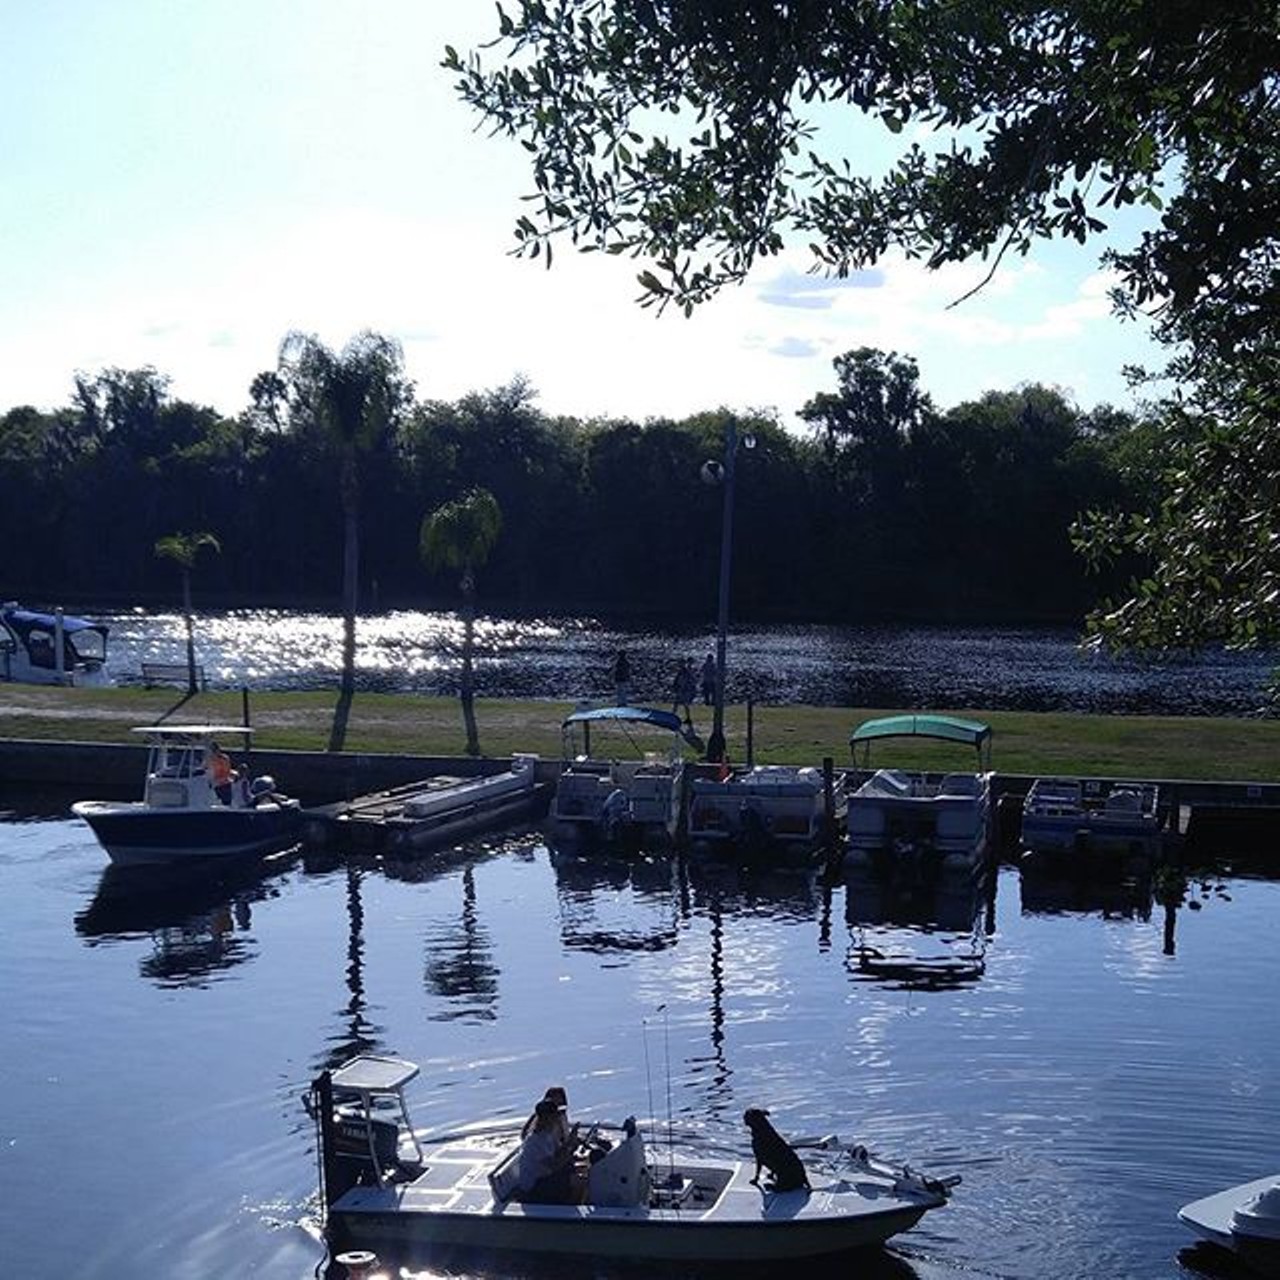 GO on a booze cruise at the &#147;Camelot on the River&#148; at Highbanks Marina
488 W Highbanks Rd, DeBary, (386) 668-4491
If you want a weekend to remember (or possibly not remember at all), make your way here. This 25-acre RV campground is on the edge of the St. Johns River, and is known among locals as the &#147;Camelon on the River.&#148; Nightly reservations are $48, and boat rentals run you $95 for four hours or $180 for eight. Grab five or 6 of your friends, as much beer as you want, and live like kings in Camelot. 
Photo via p_crook/Instagram